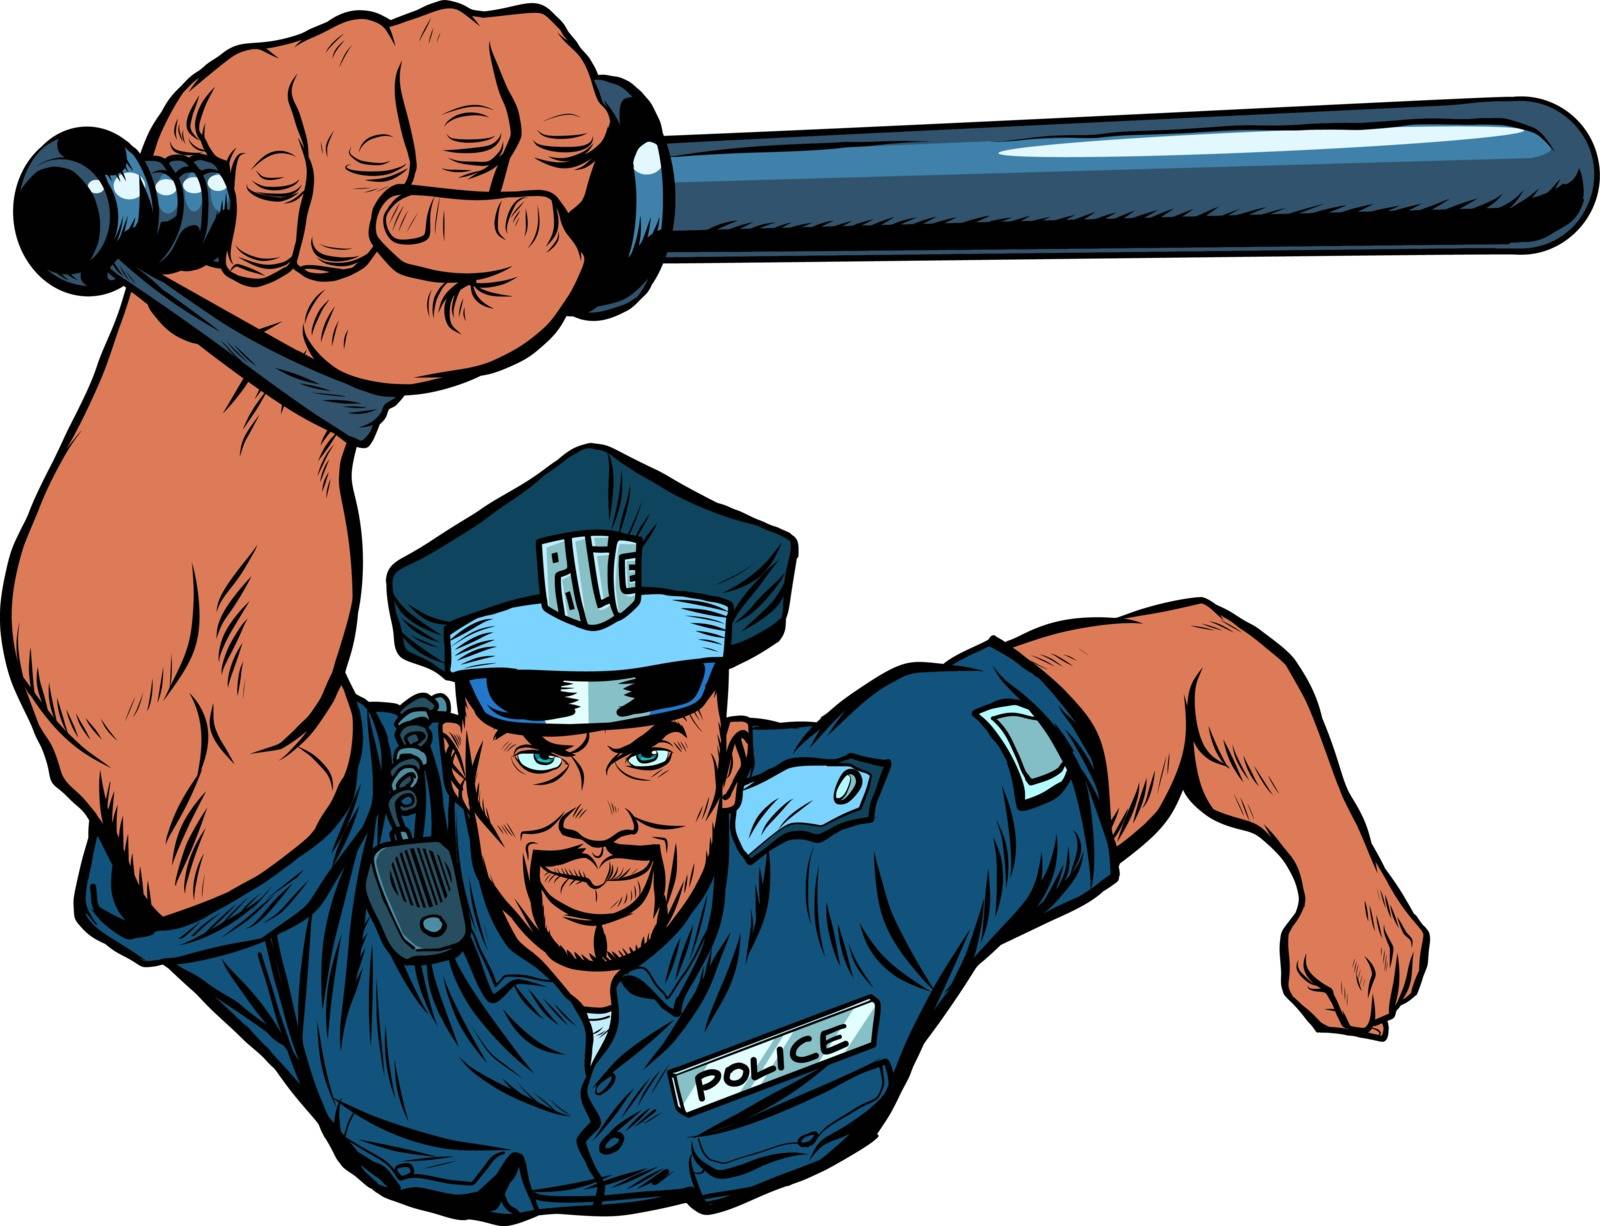 African Police officer with a baton. Pop art retro vector illustration 50s 60s style